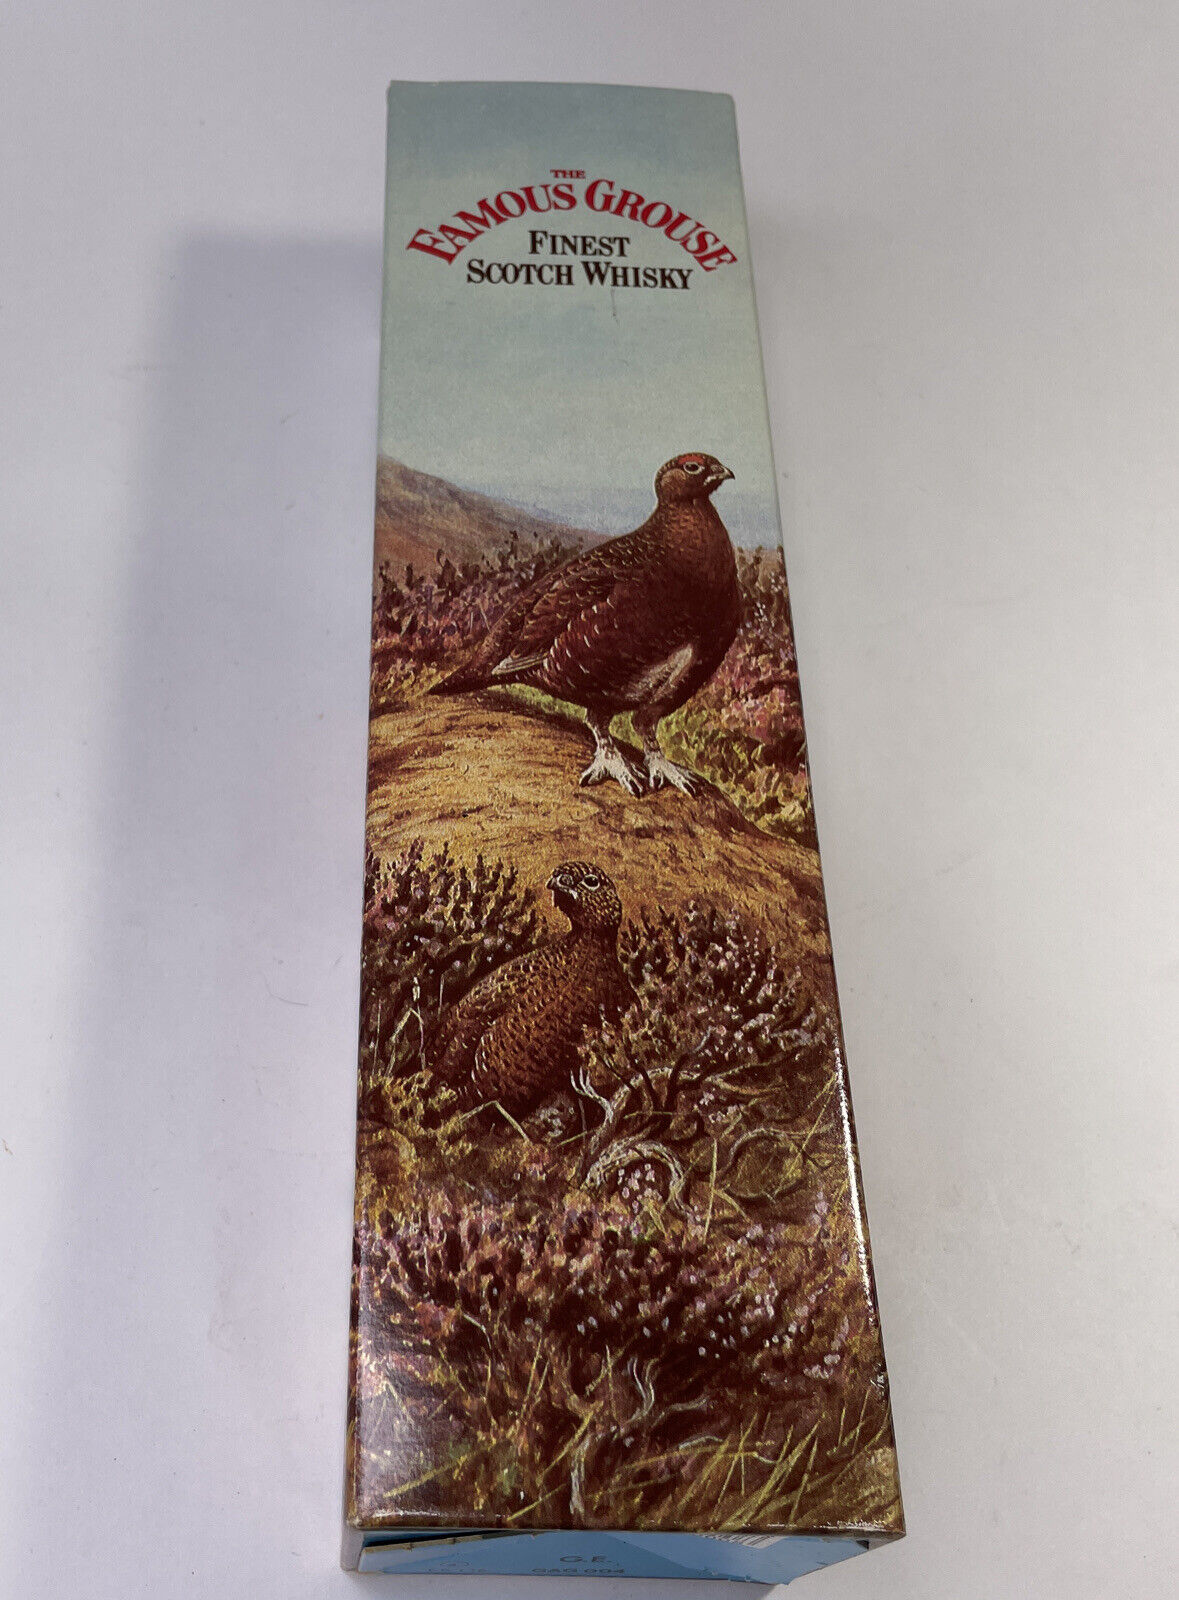 Vintage 1985-1989 Famous Grouse Finest Scotch Whisky Empty Box Made In Scotland